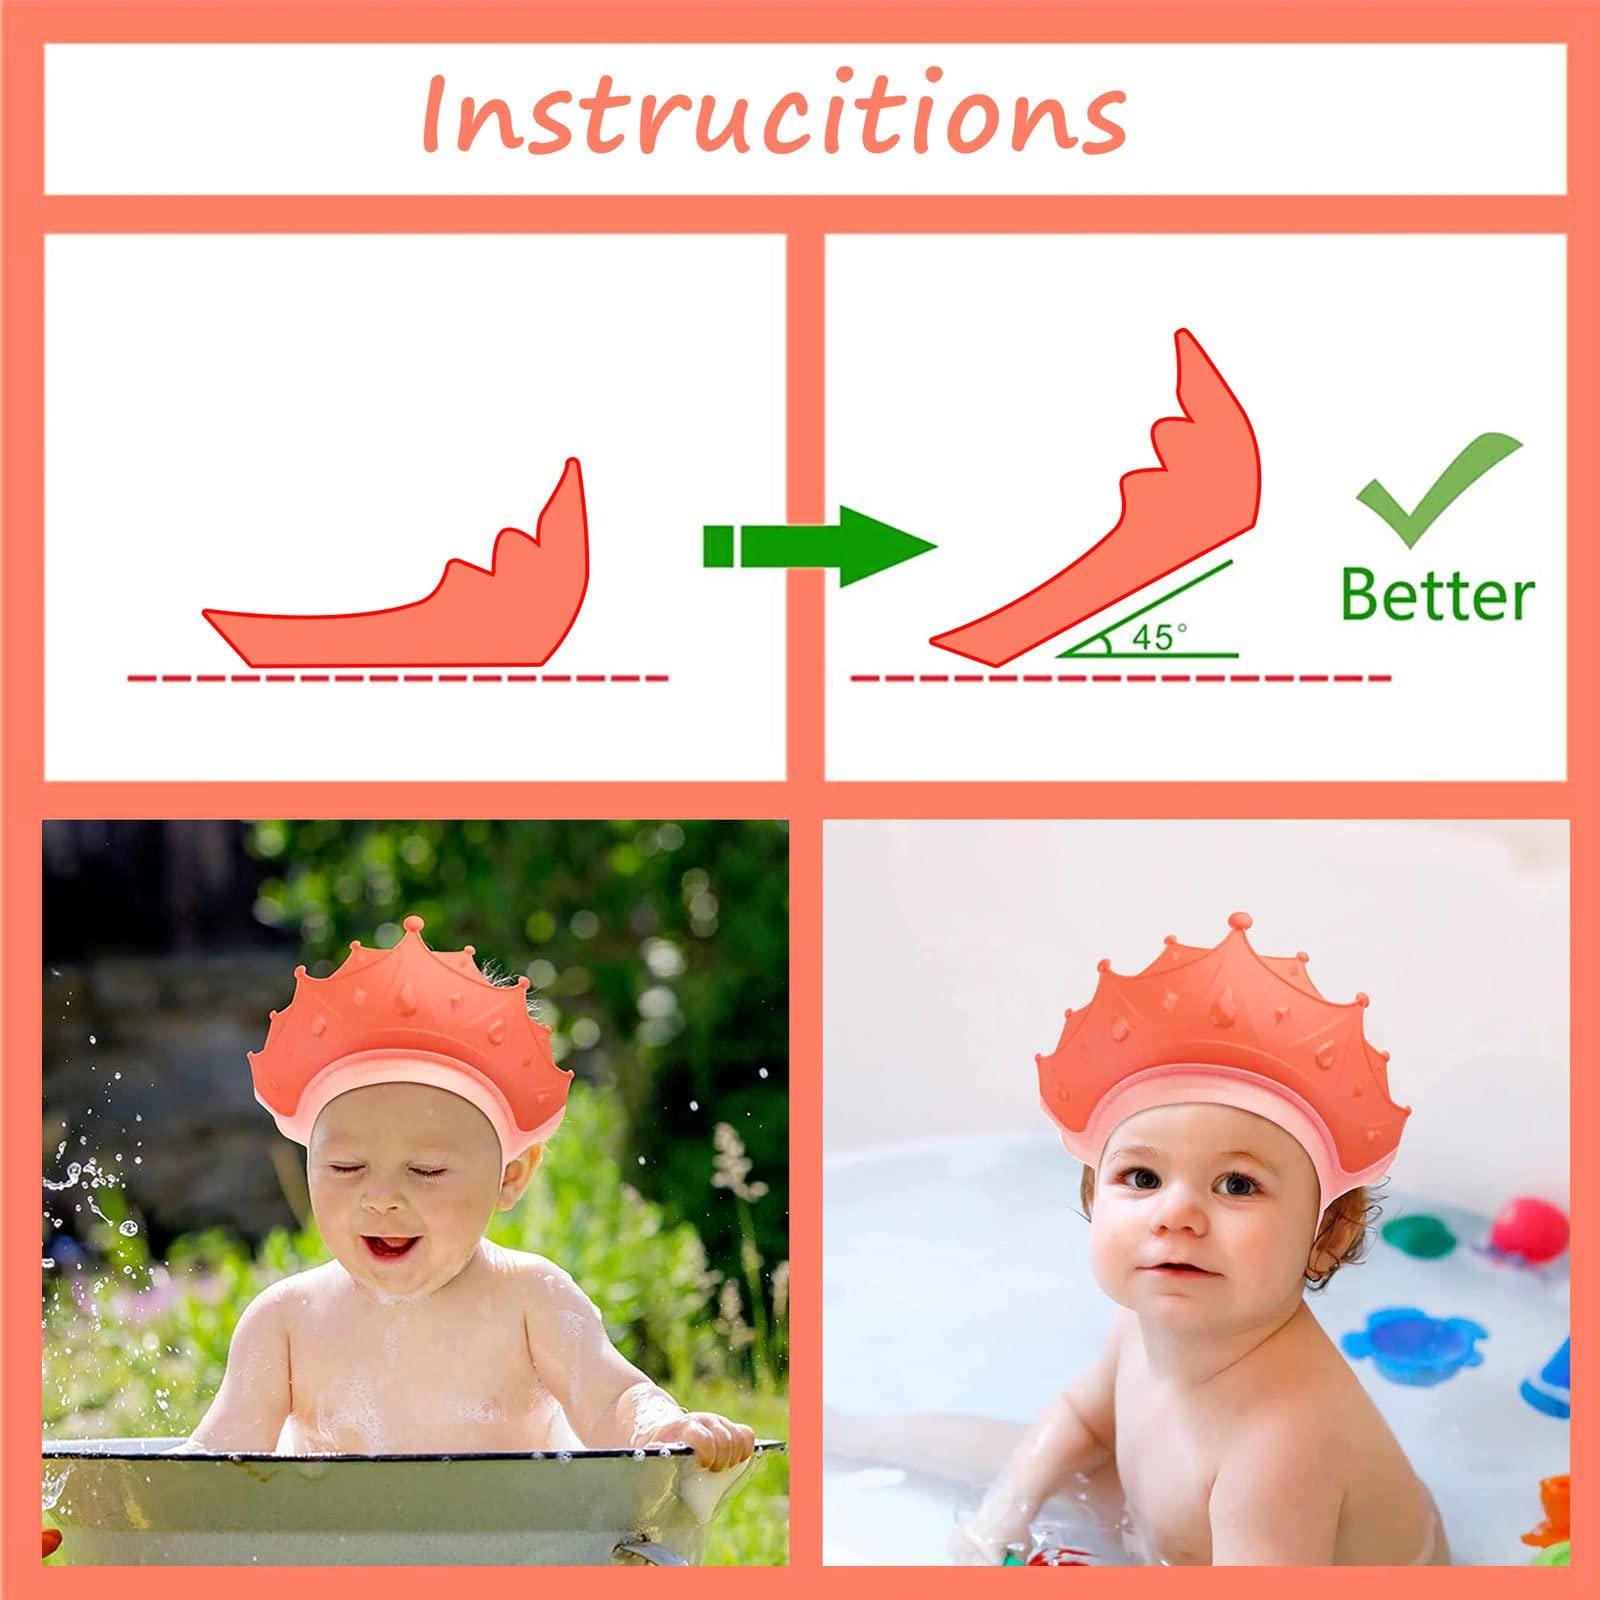 2 PCS Baby Shower Cap Silicone for Children， Soft Adjustable Bathing Crown Hat Safe for Washing Hair， Protect Eyes and Ears from Shampoo for Baby ，Toddlers and Kids from 6 Months to 12-Year Old (red)